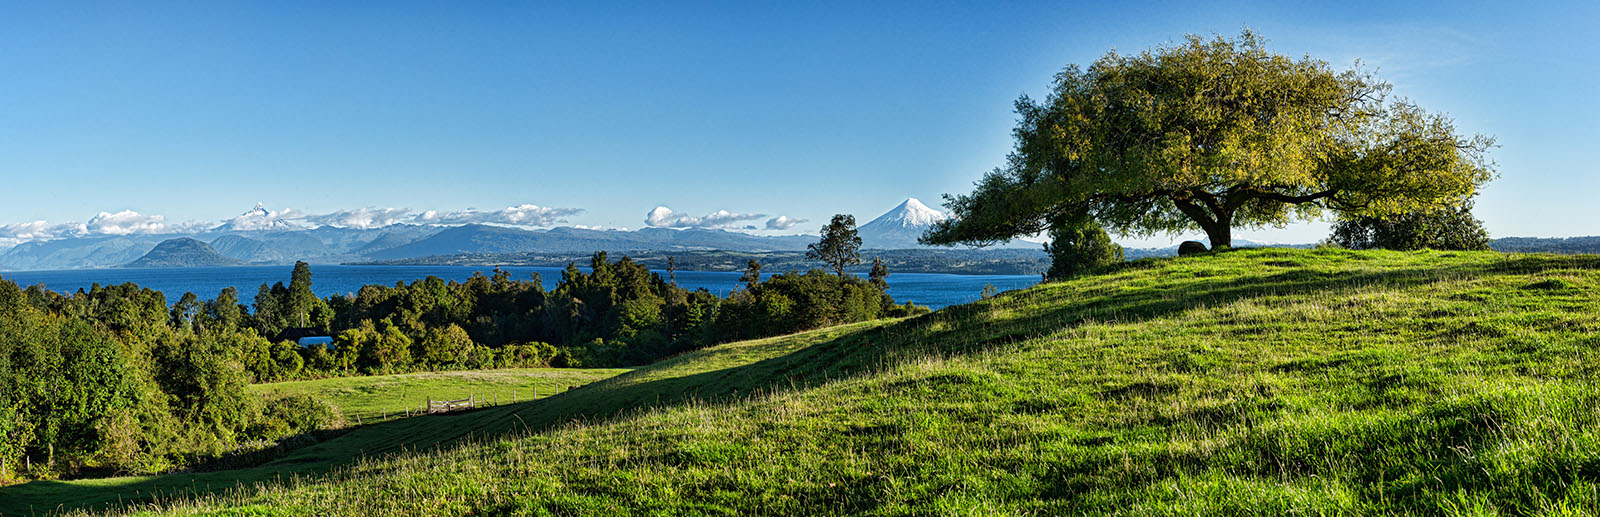 View of Volcan Osorno, Rupanco Lake and Puntiagudo